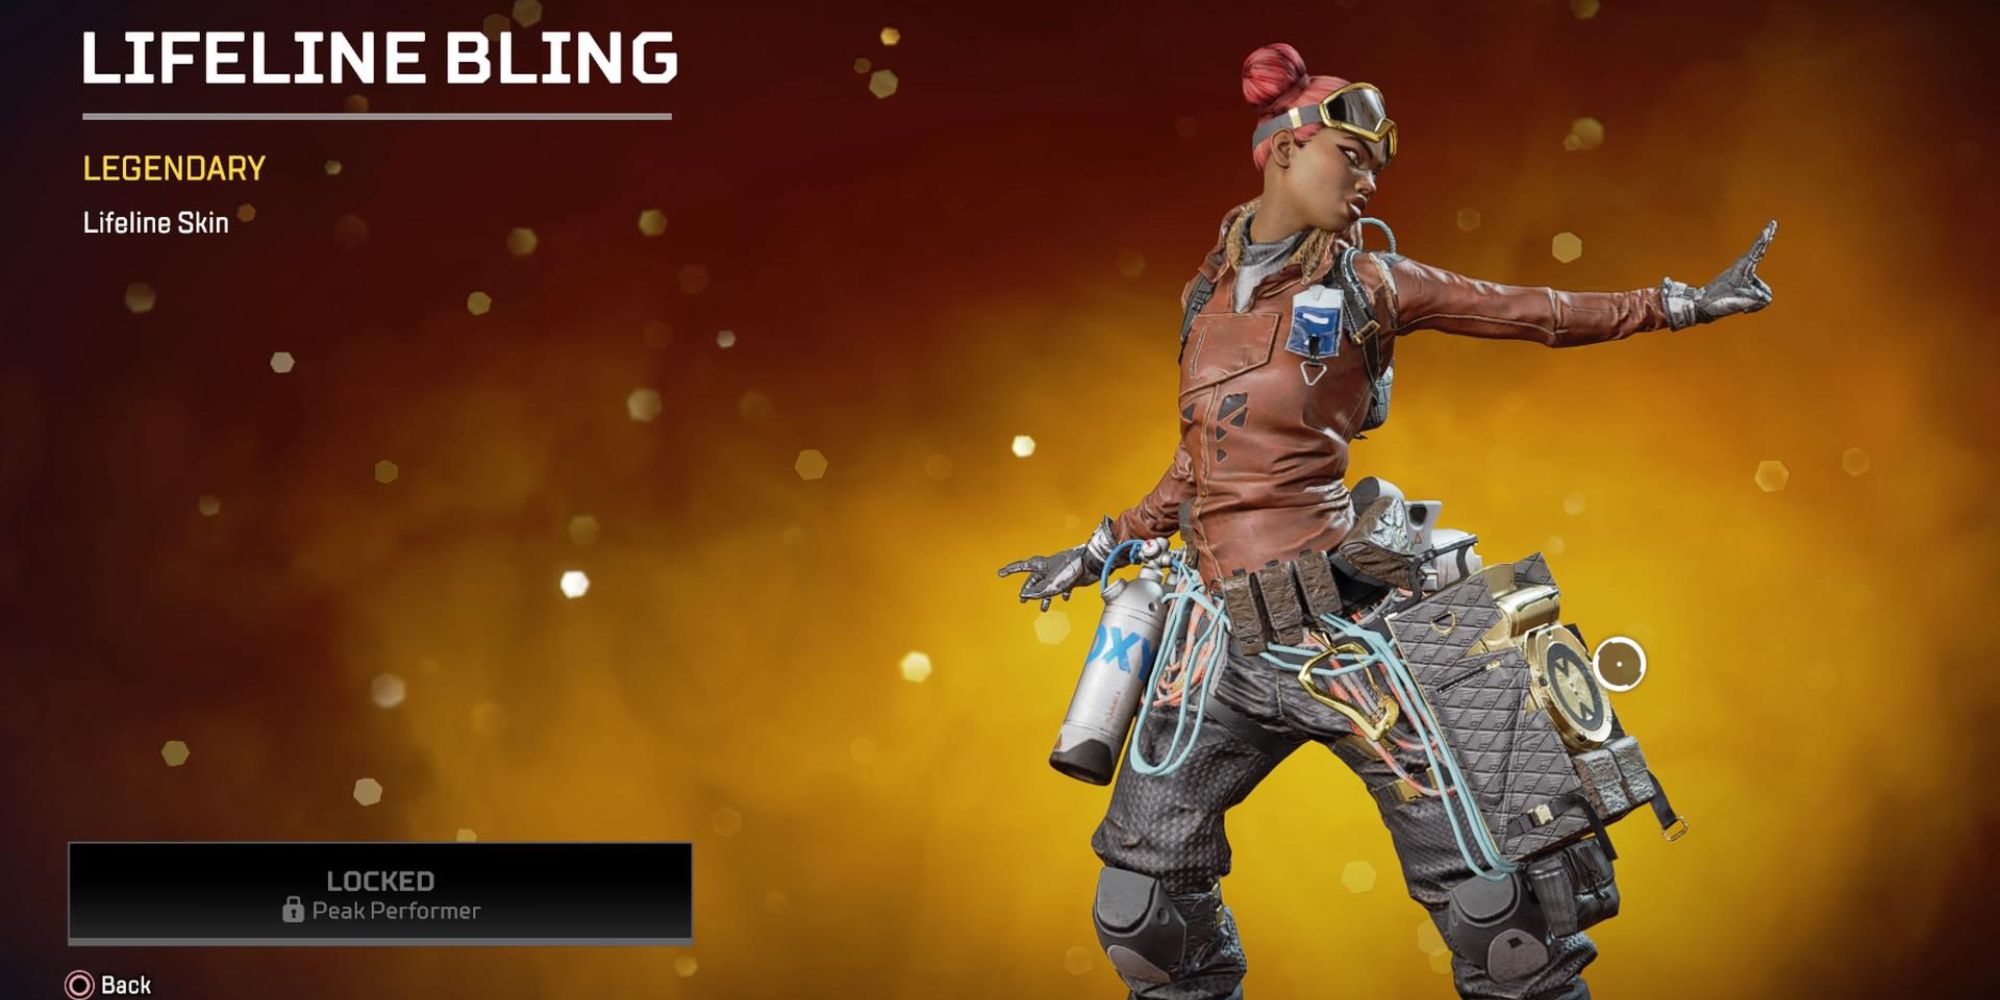 An image of Lifeline's Bling skin from Apex Legends